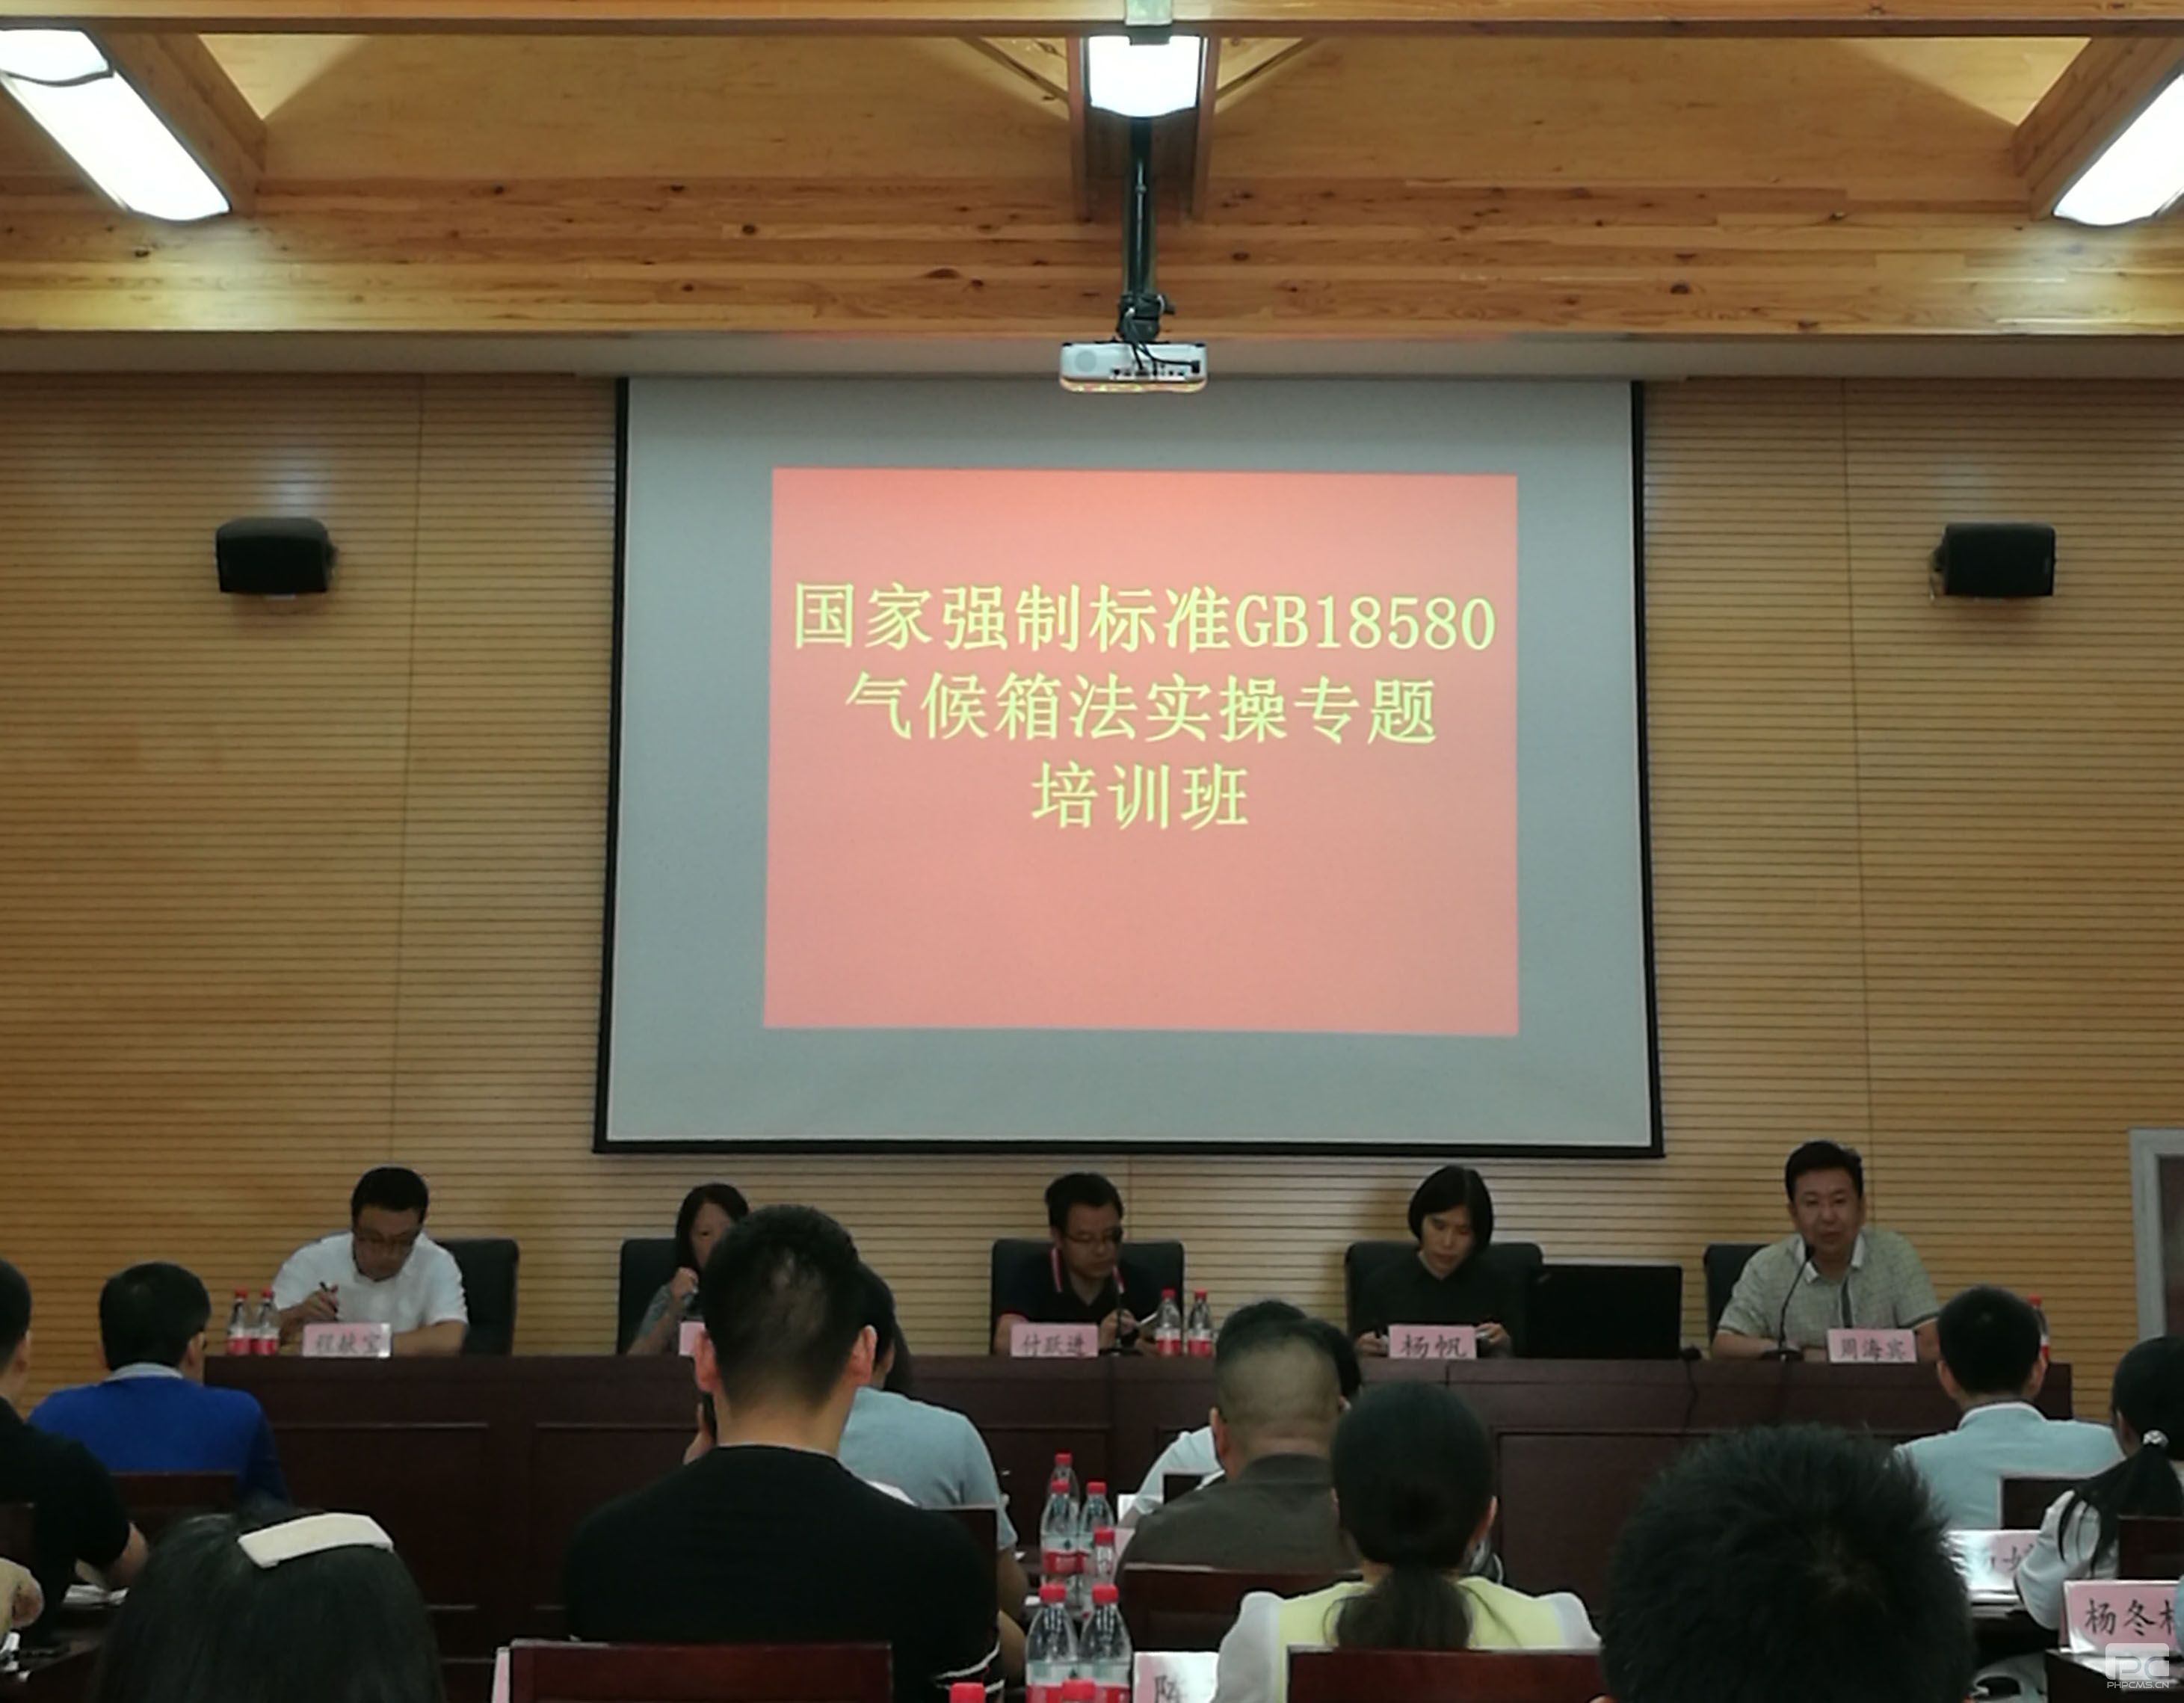 The first phase of the GB18580 climate box practice training class started in the Chinese Academy of Forestry